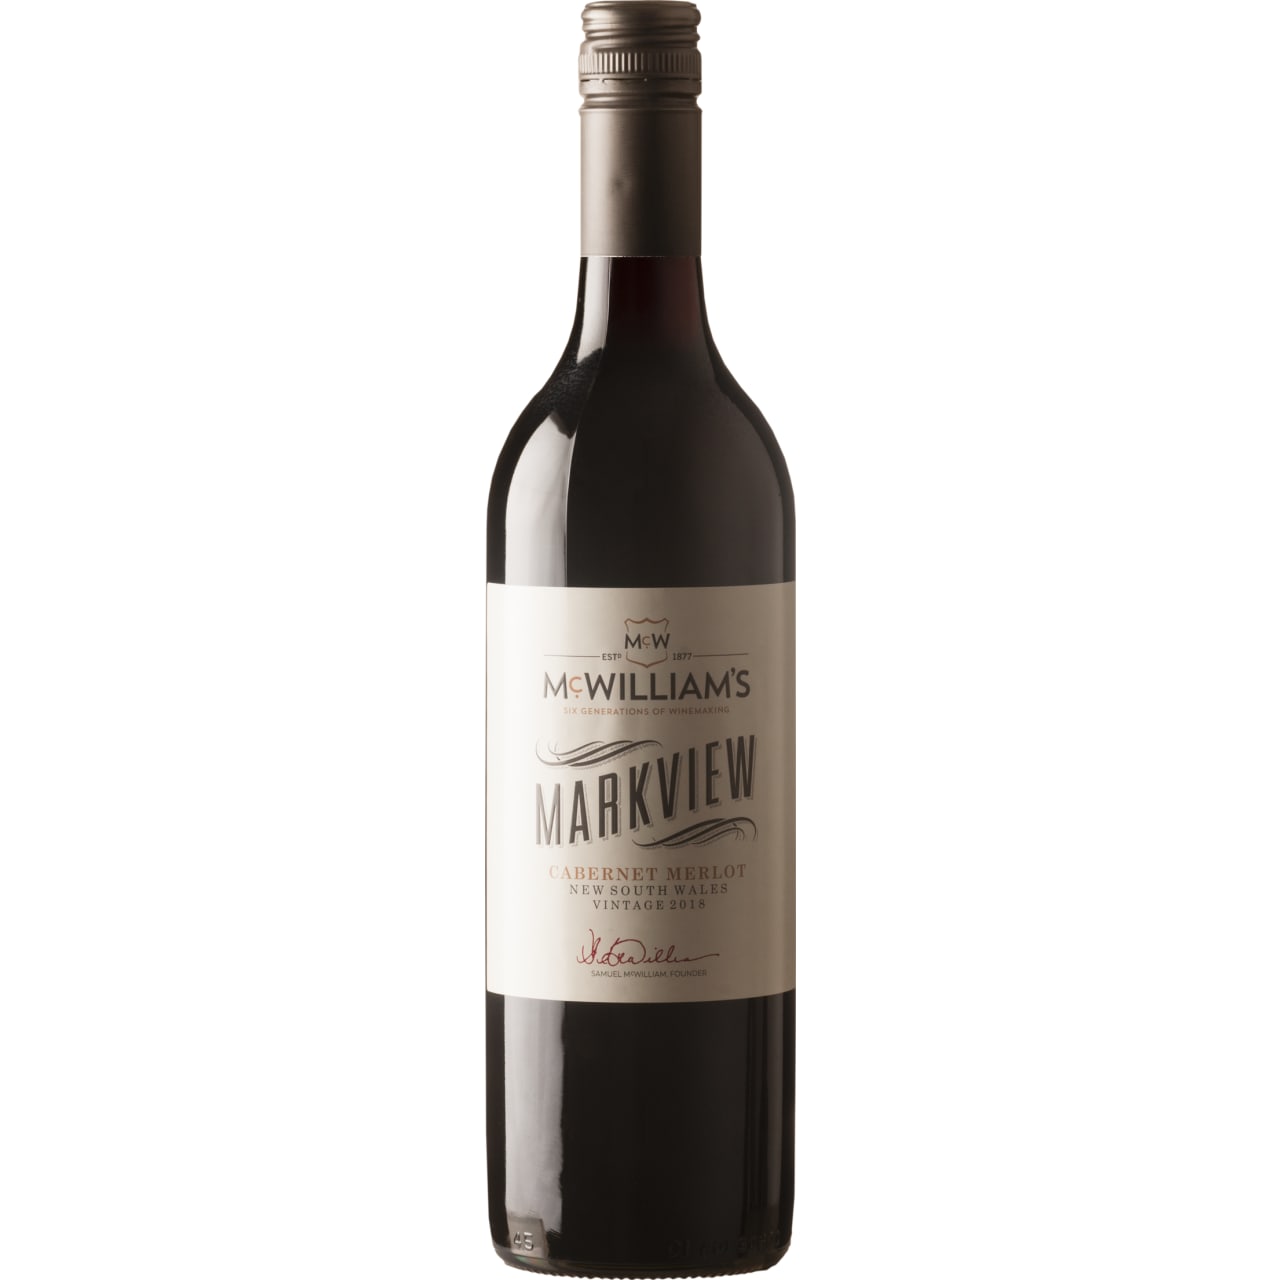 Soft, full-bodied Australian Shiraz with notes of juicy plums, blackberries and cherries.